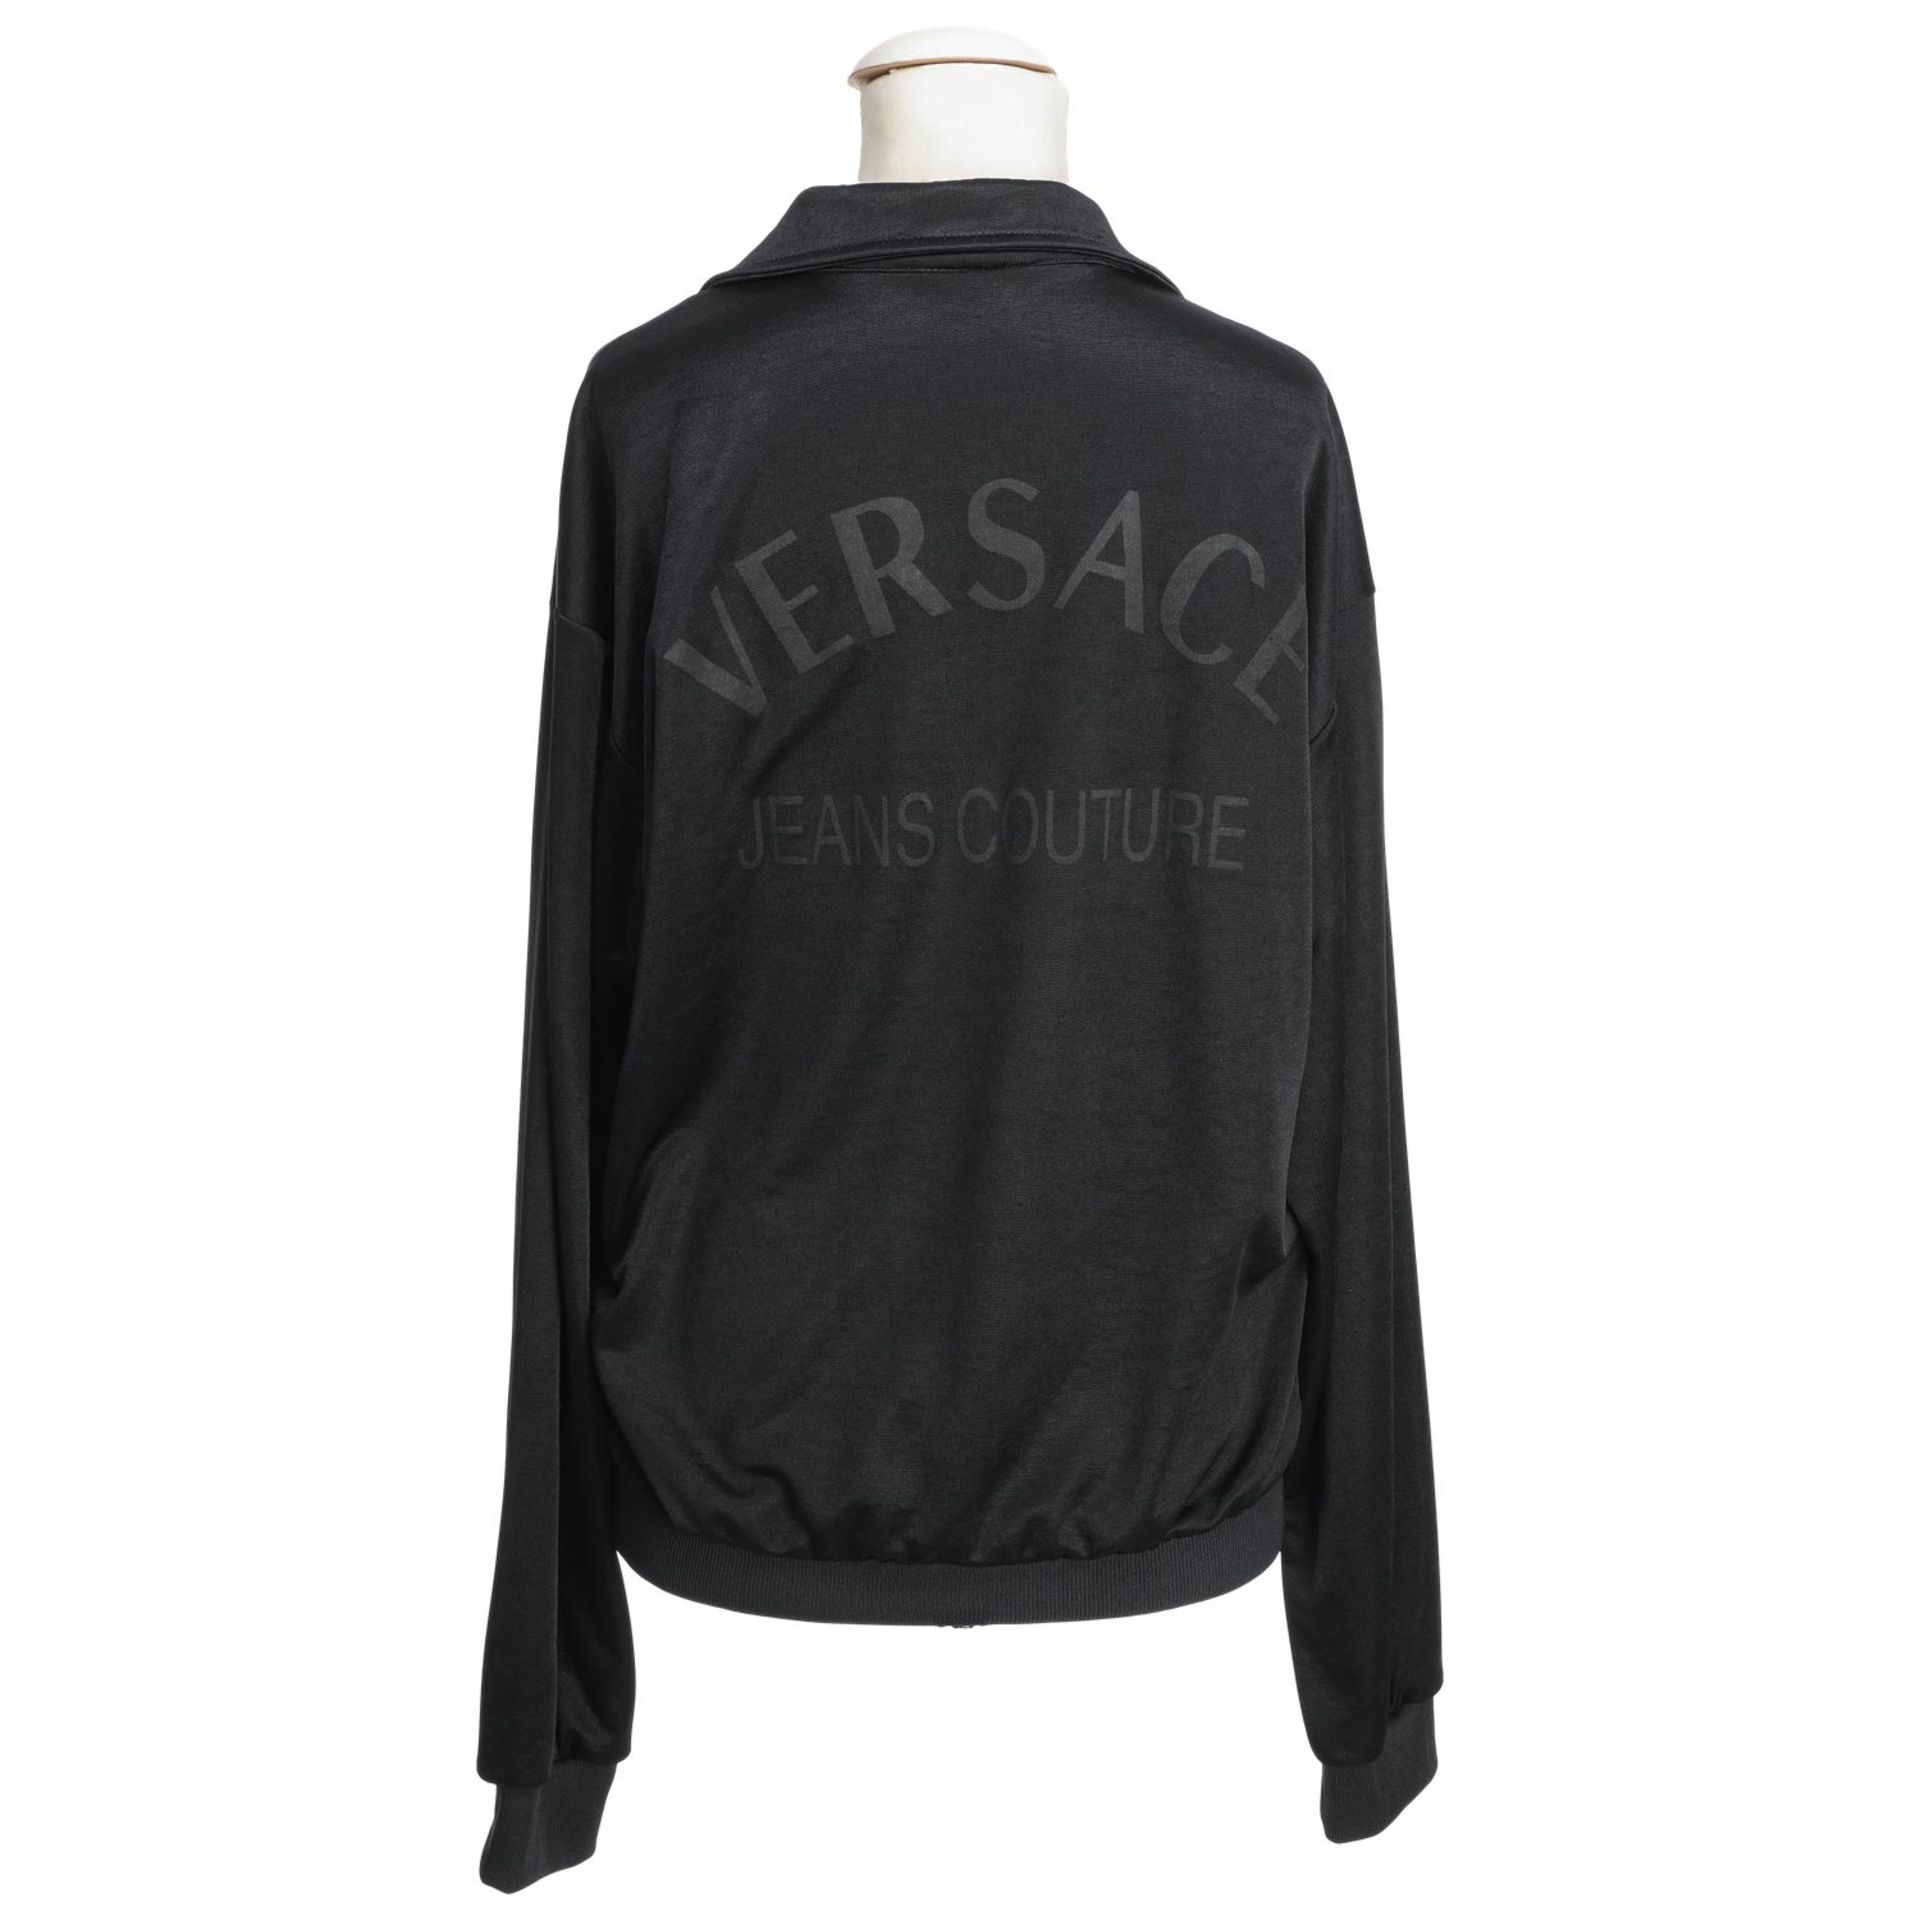 VERSACE JEANS COUTURE Trainingsjacke, Gr. M. - Image 4 of 4